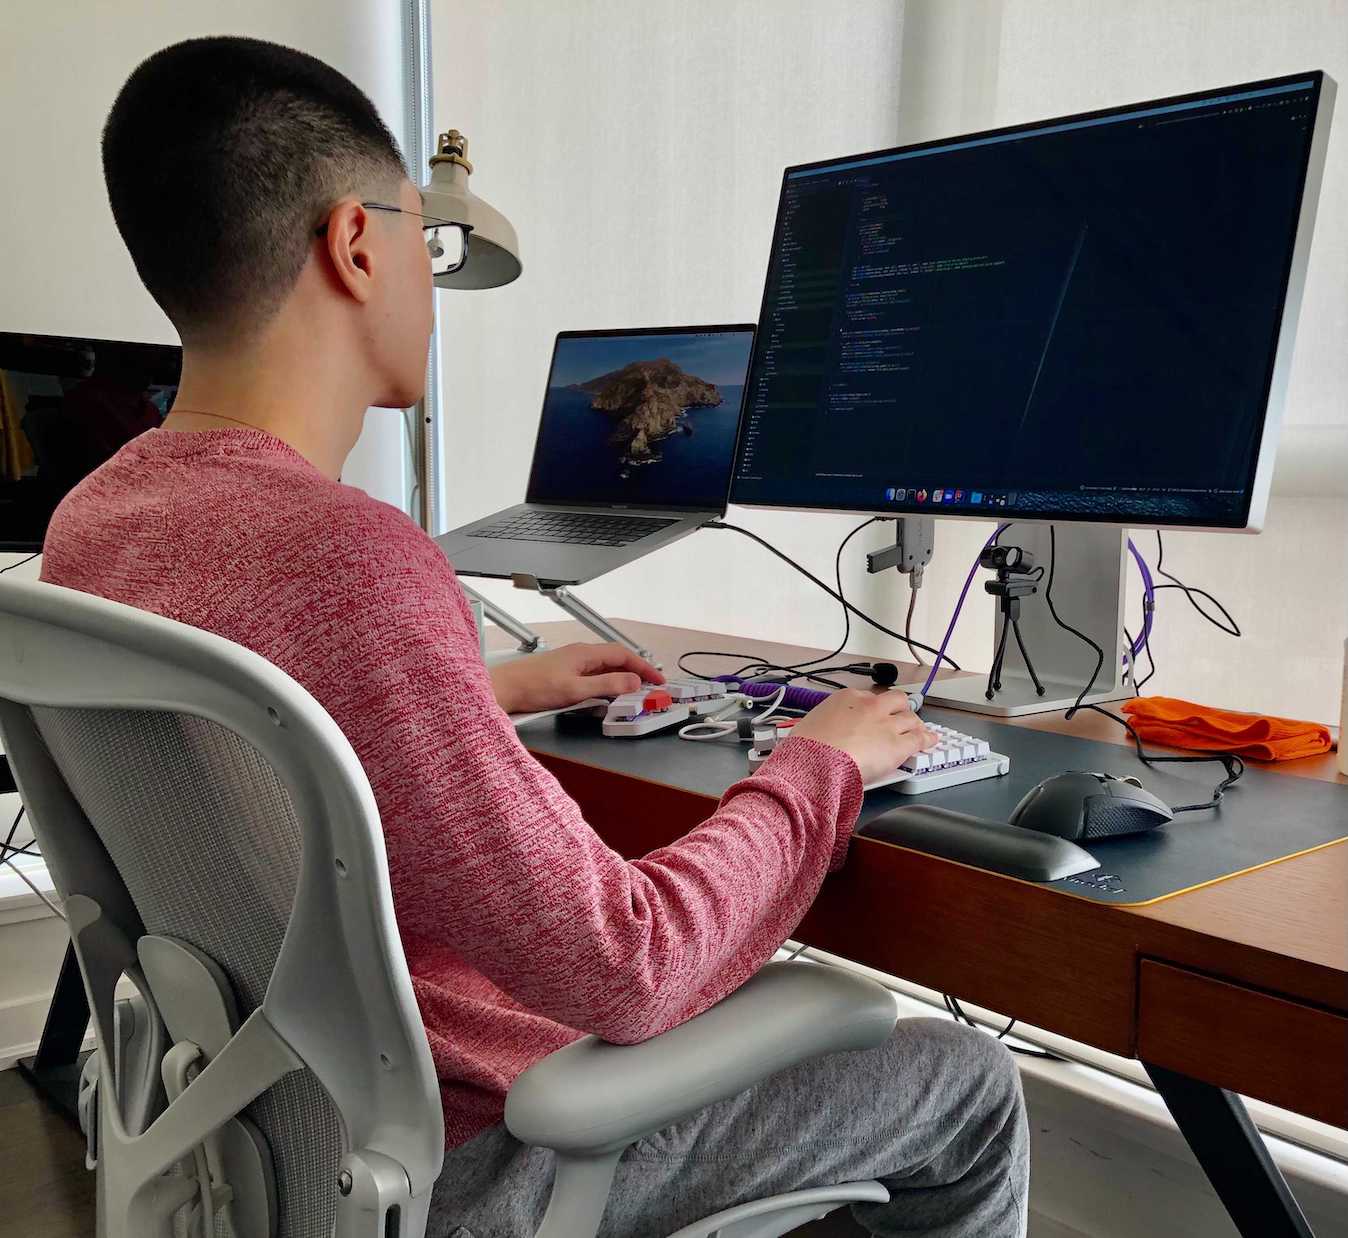 A team member sitting down working from home with their laptop and monitor.